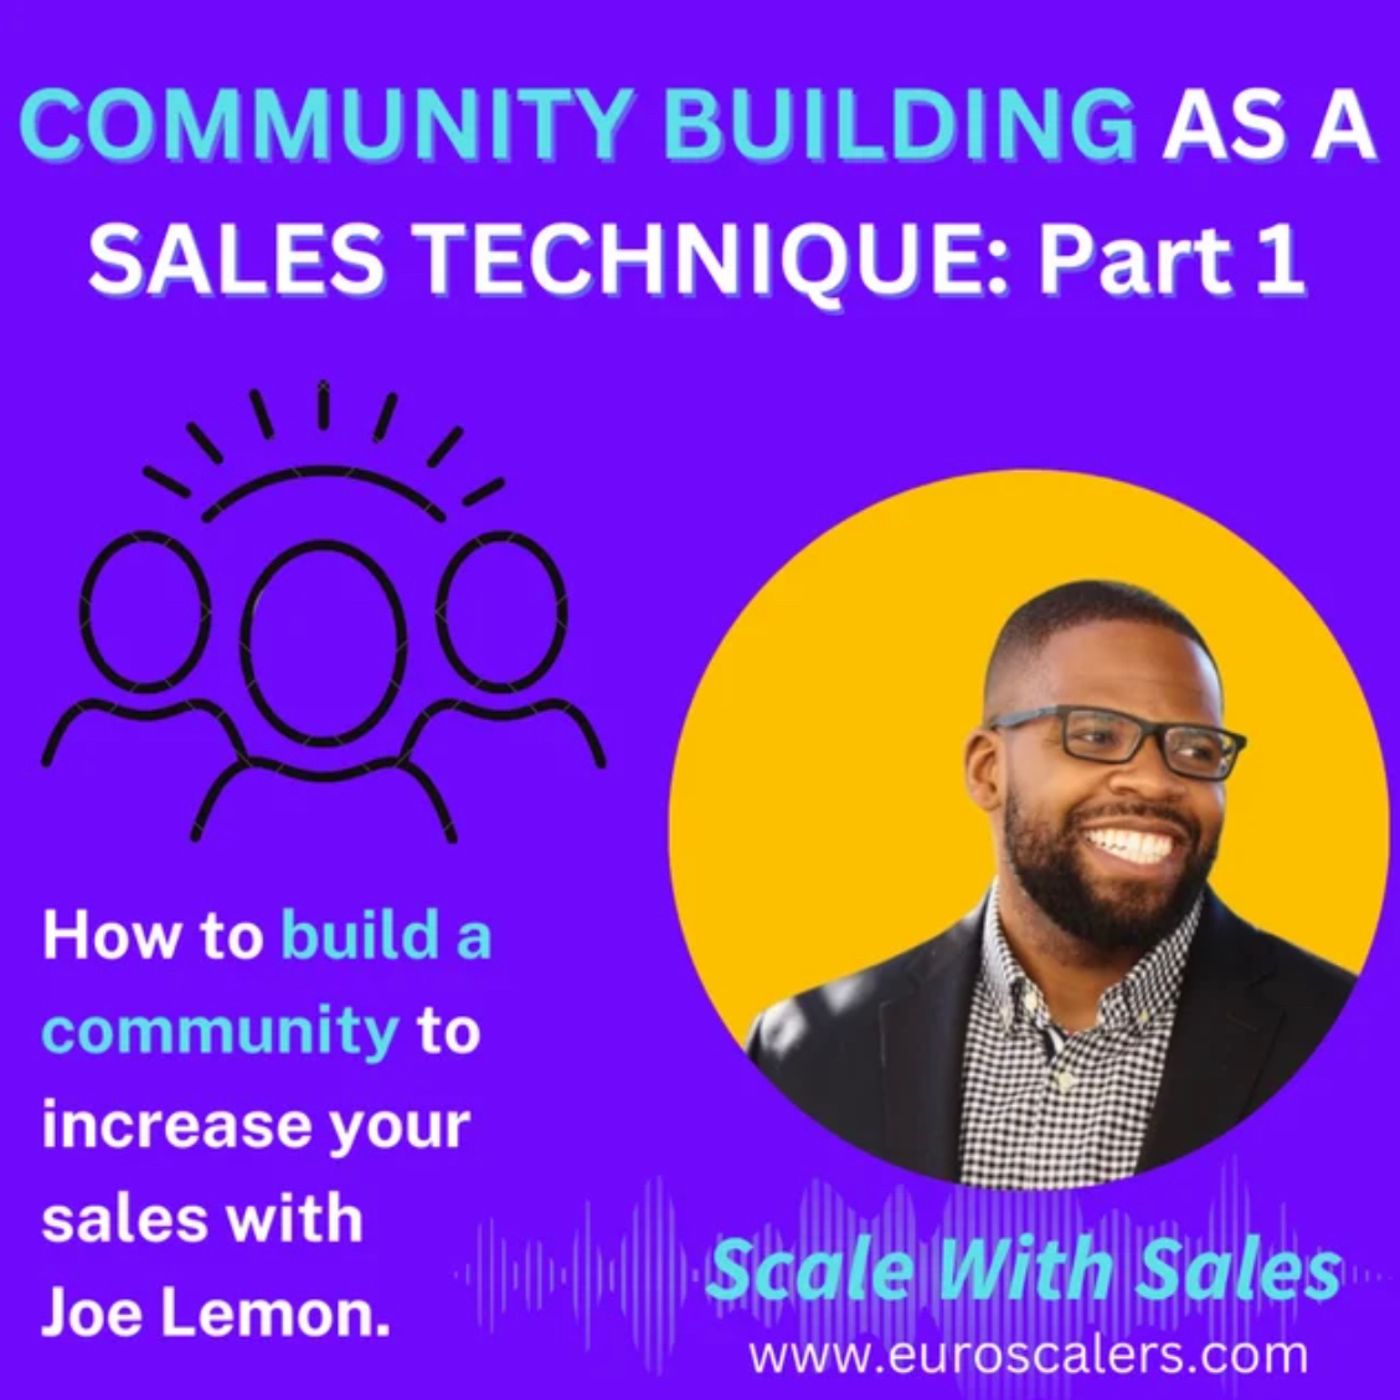 Community Building as a Sales - Rasmus Basilier with EuroScalers  #CommunityLedGrowth Part 1 Image